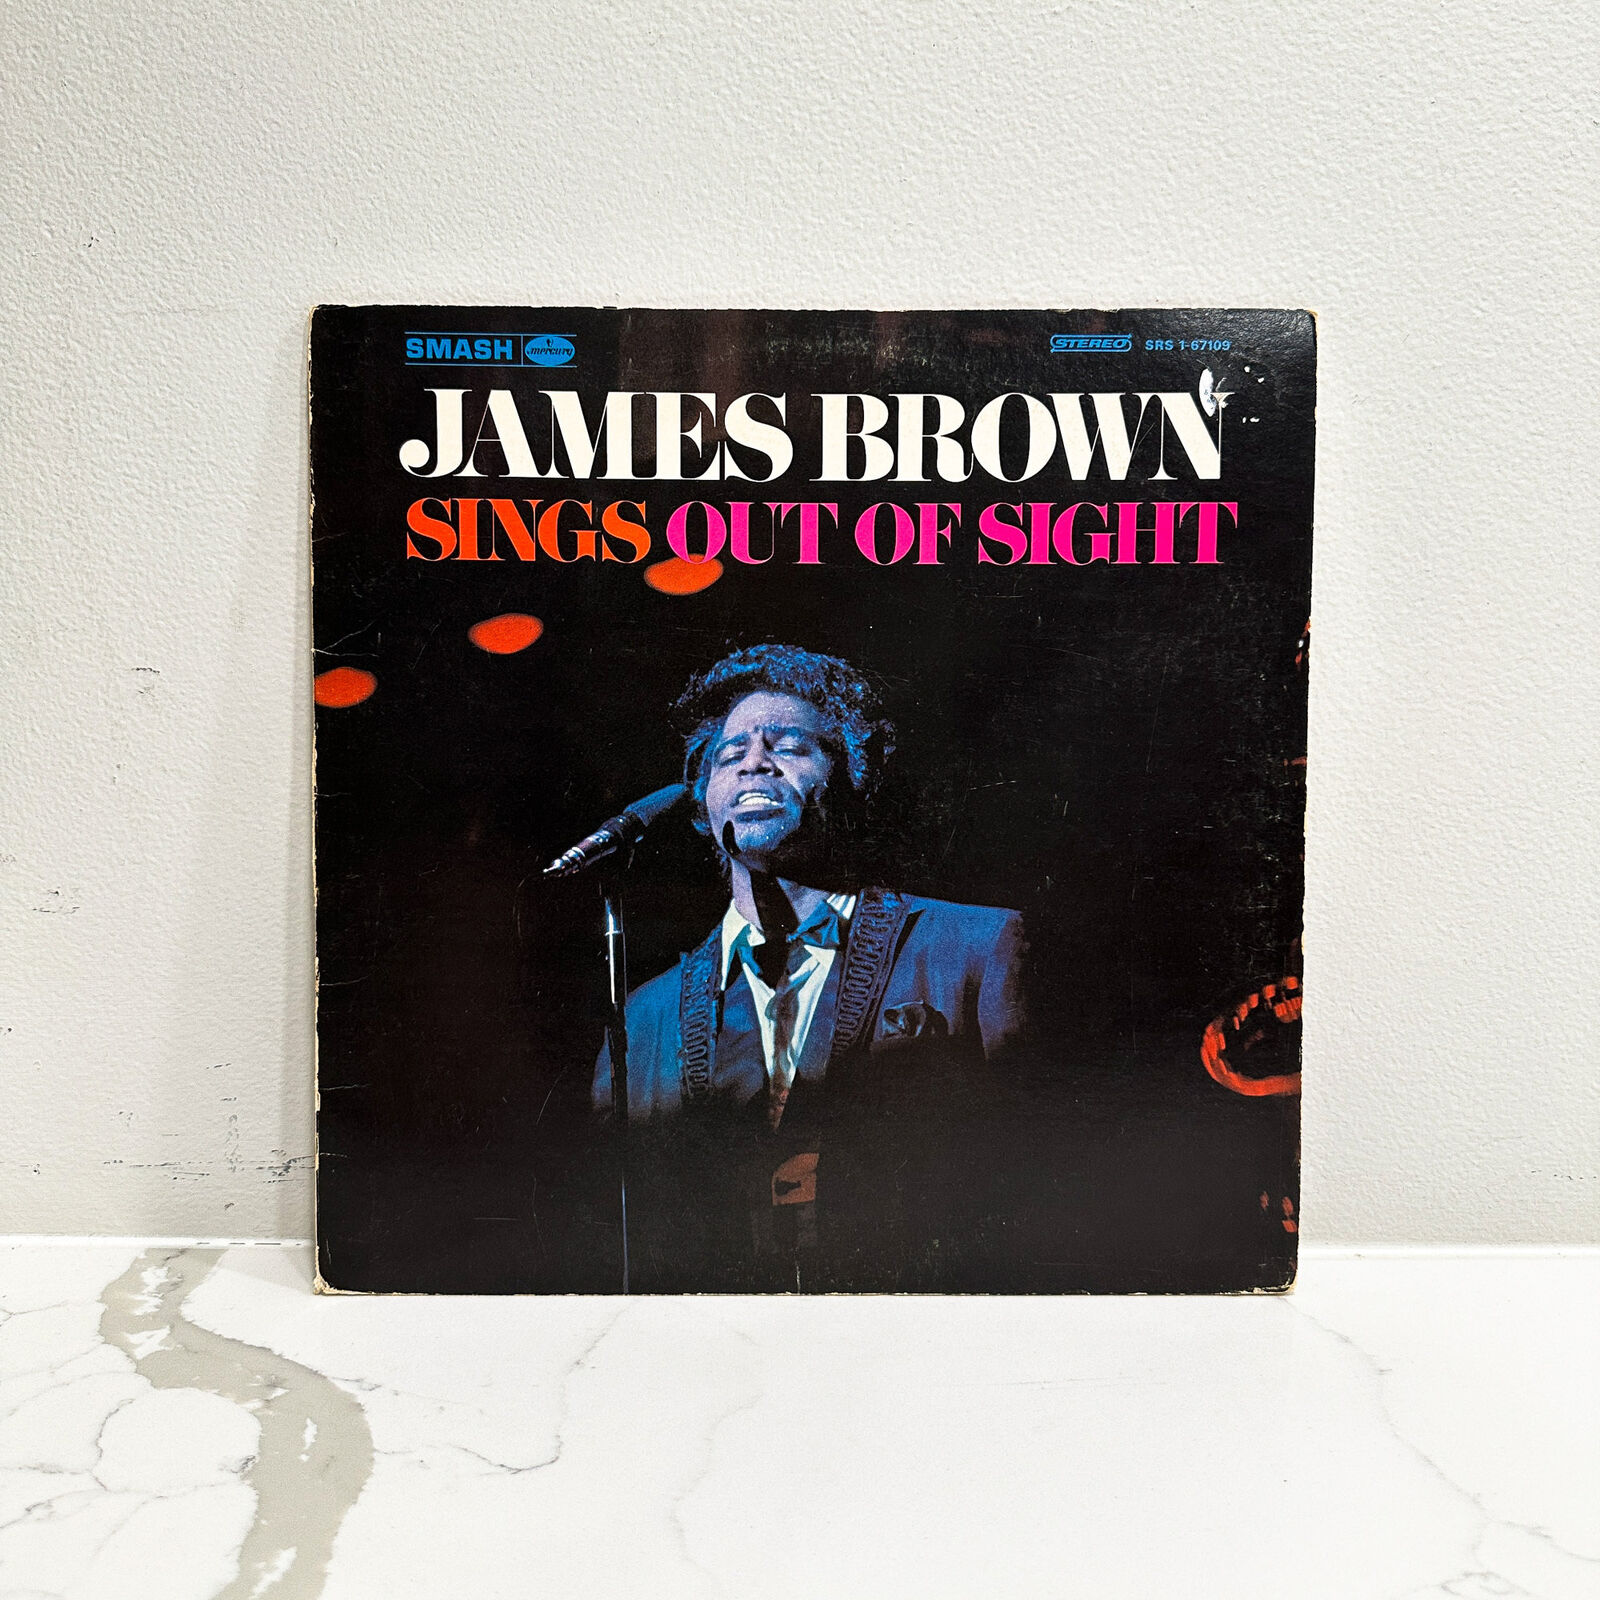 James Brown – Sings Out Of Sight - Vinyl LP Record - 1968